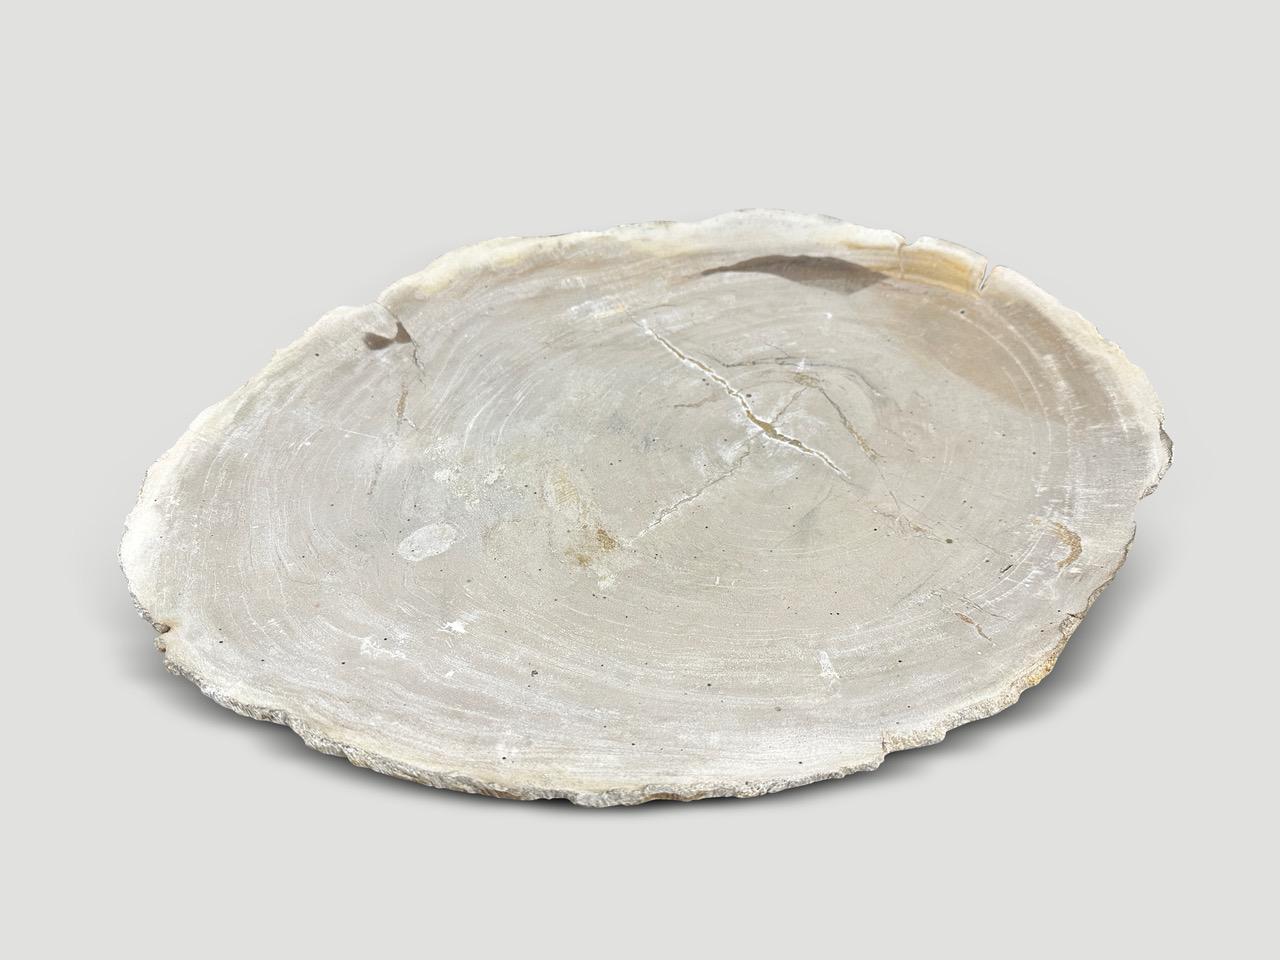 Minimalist petrified wood shallow dish. Polished on both sides. Perfect as a place holder for jewelry, a large coaster or for a cheese platter to name a few options. We have a collection of stunning petrified wood slabs and dishes. The price and